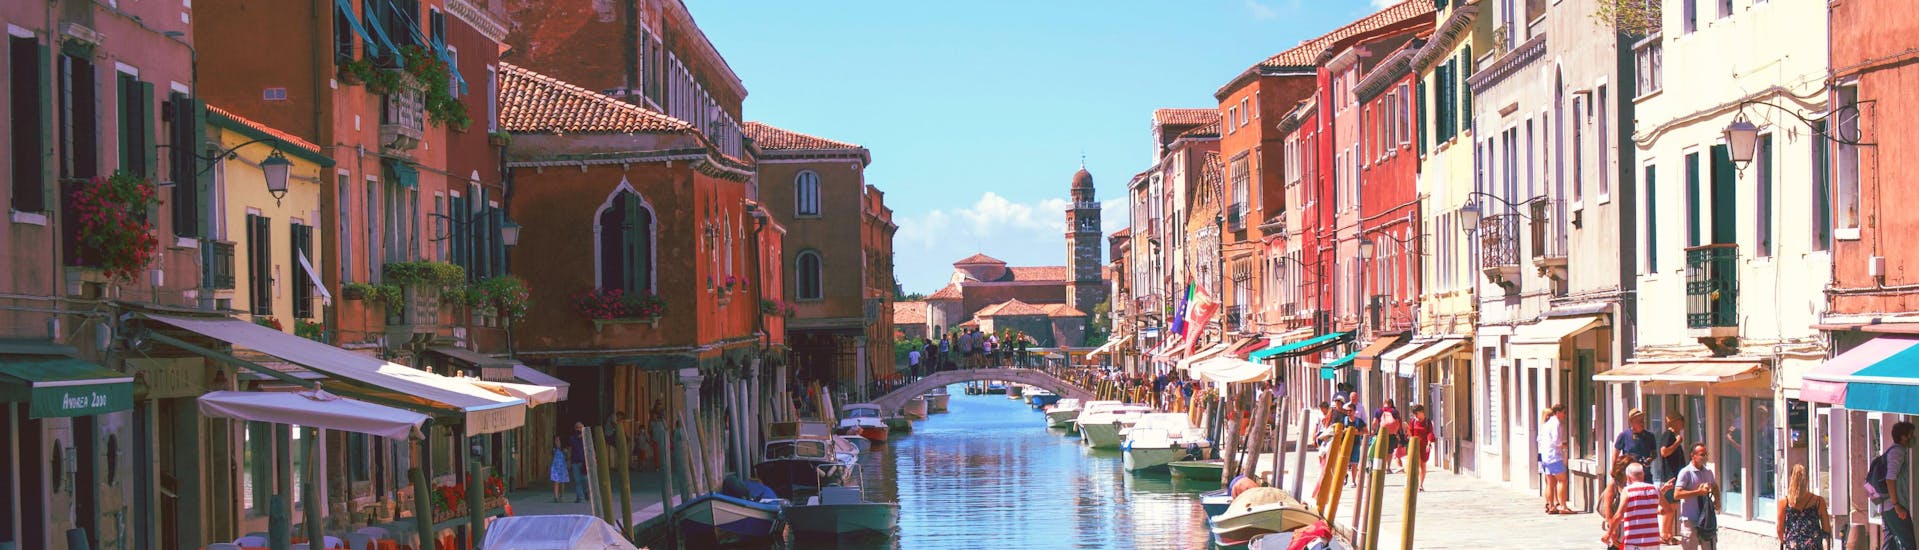 A gondoliere is paddling the boat through a narrow canal on a gondola ride near Murano in Venice.